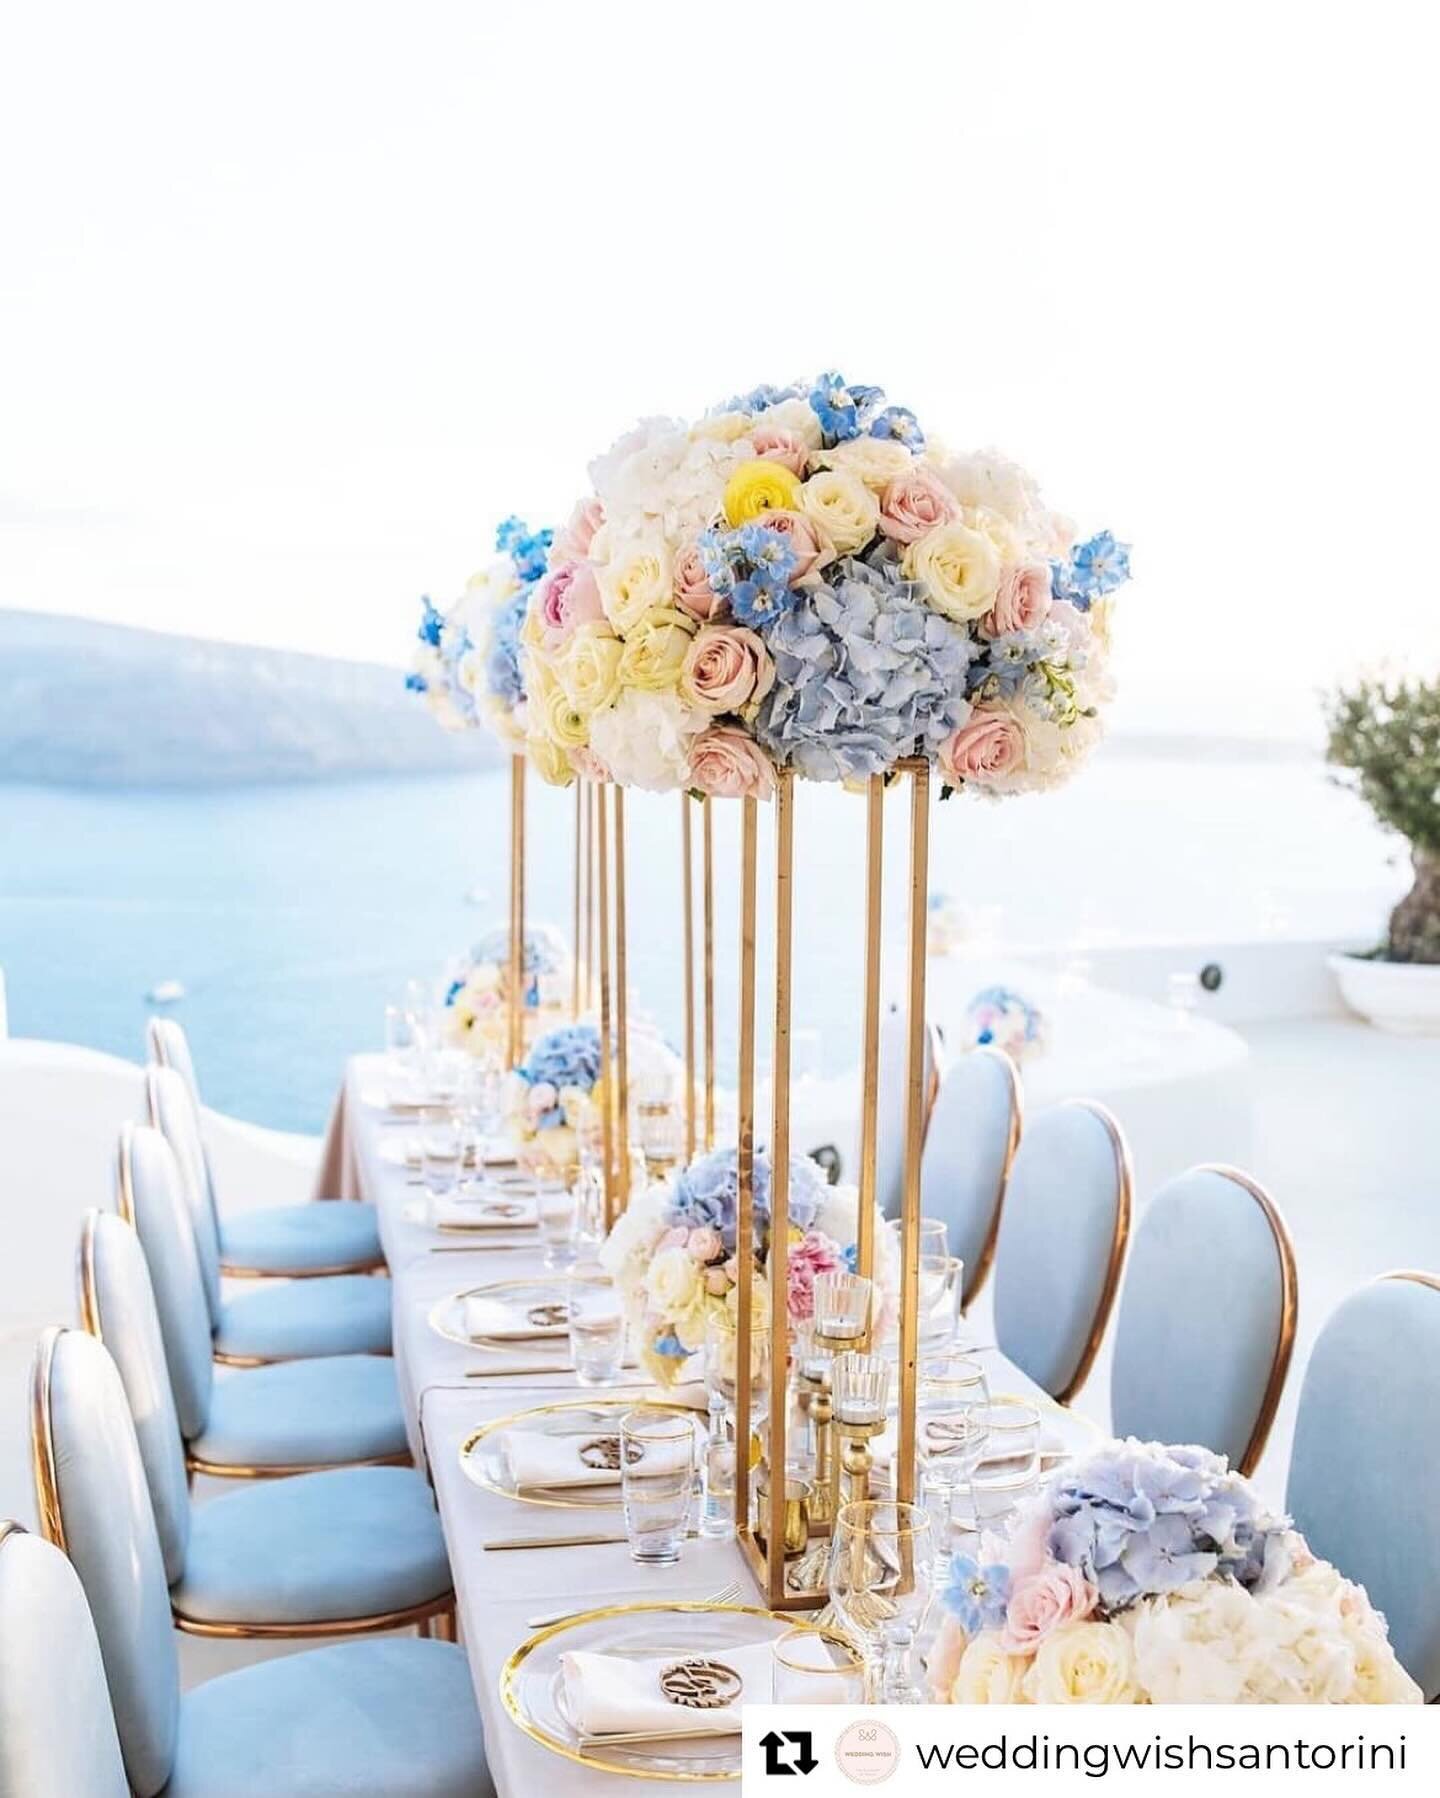 Pastel wash.

***

Repost @weddingwishsantorini

Speaking of 💫 fairytales💫 ! Take a seat at a pastel colored happy ending!💍🥰 Well done @vangelisphotography 📷✨ We simply A🔹D🔹O🔹R 🔹E  that shot! 🌟😍
.
.
.
Styling &amp; Floral design @weddingwi